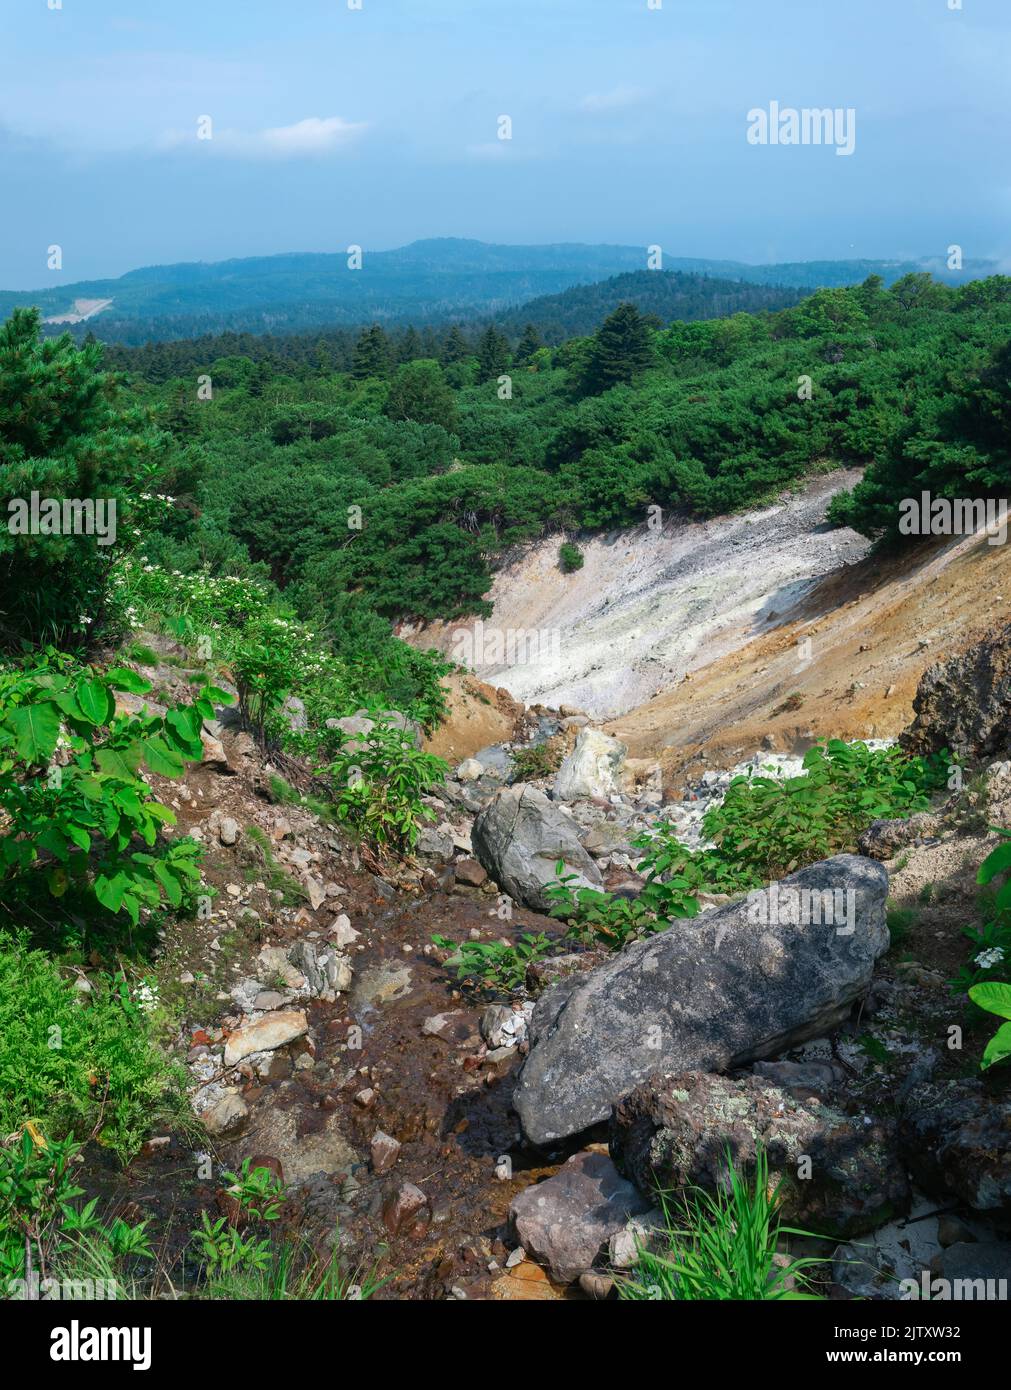 landscape with geothermal mineralized stream on the slope of the Mendeleev volcano, Kunashir island Stock Photo